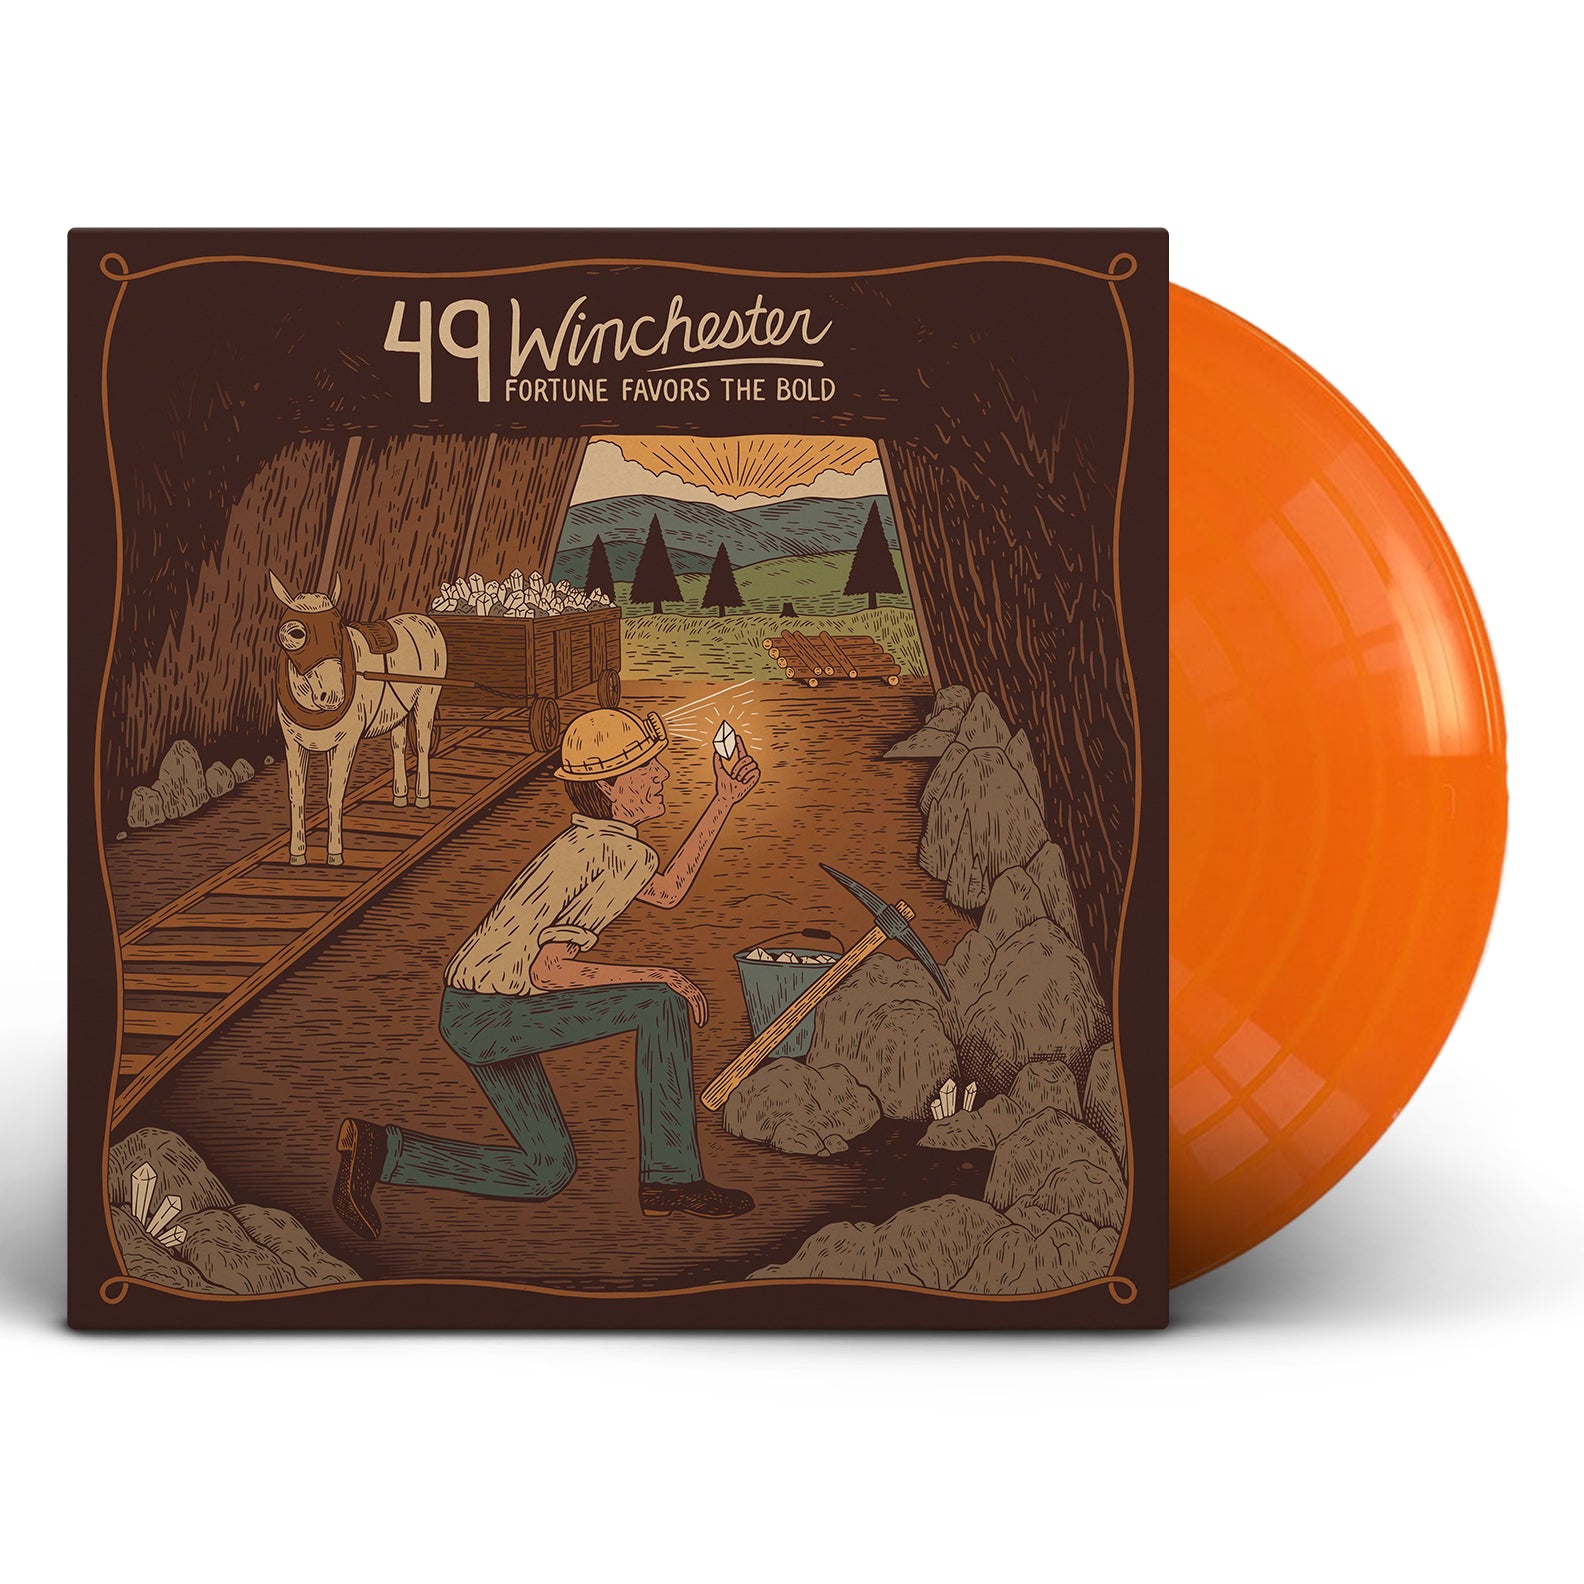 49 Winchester - Fortune Favors the Bold [Color Vinyl]